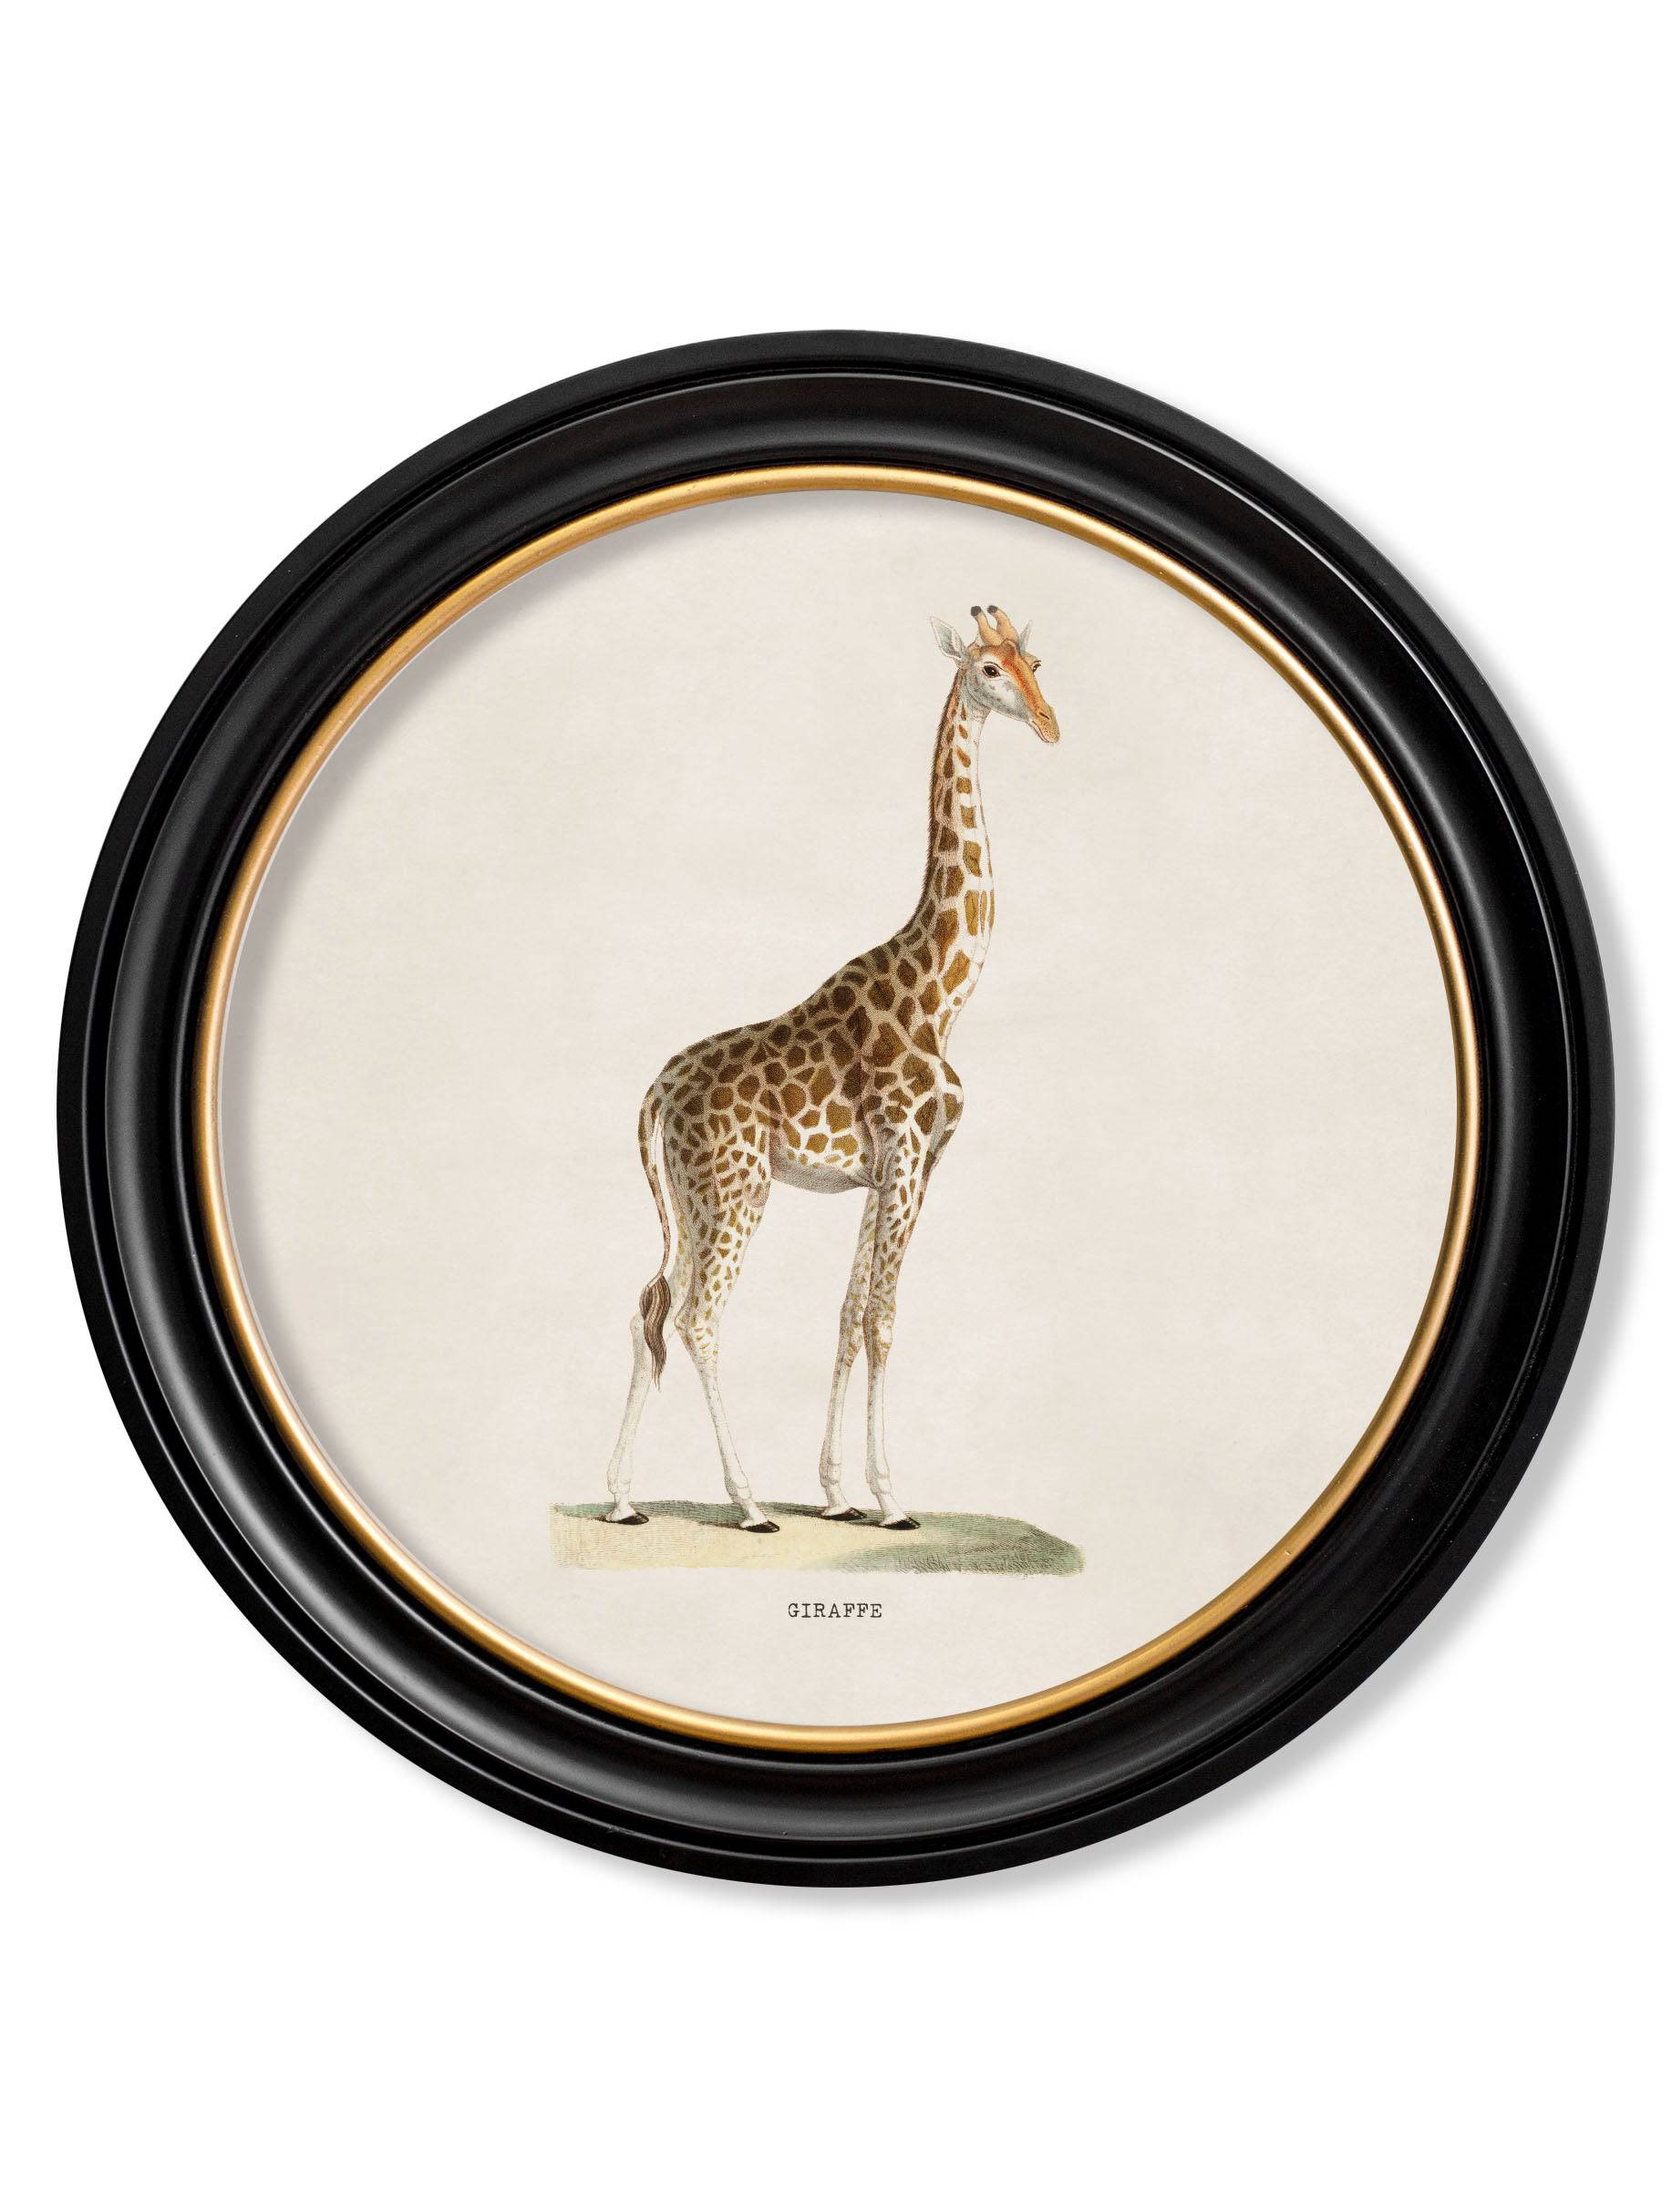 C.1836 Giraffe - Round Frame for sale - Woodcock and Cavendish